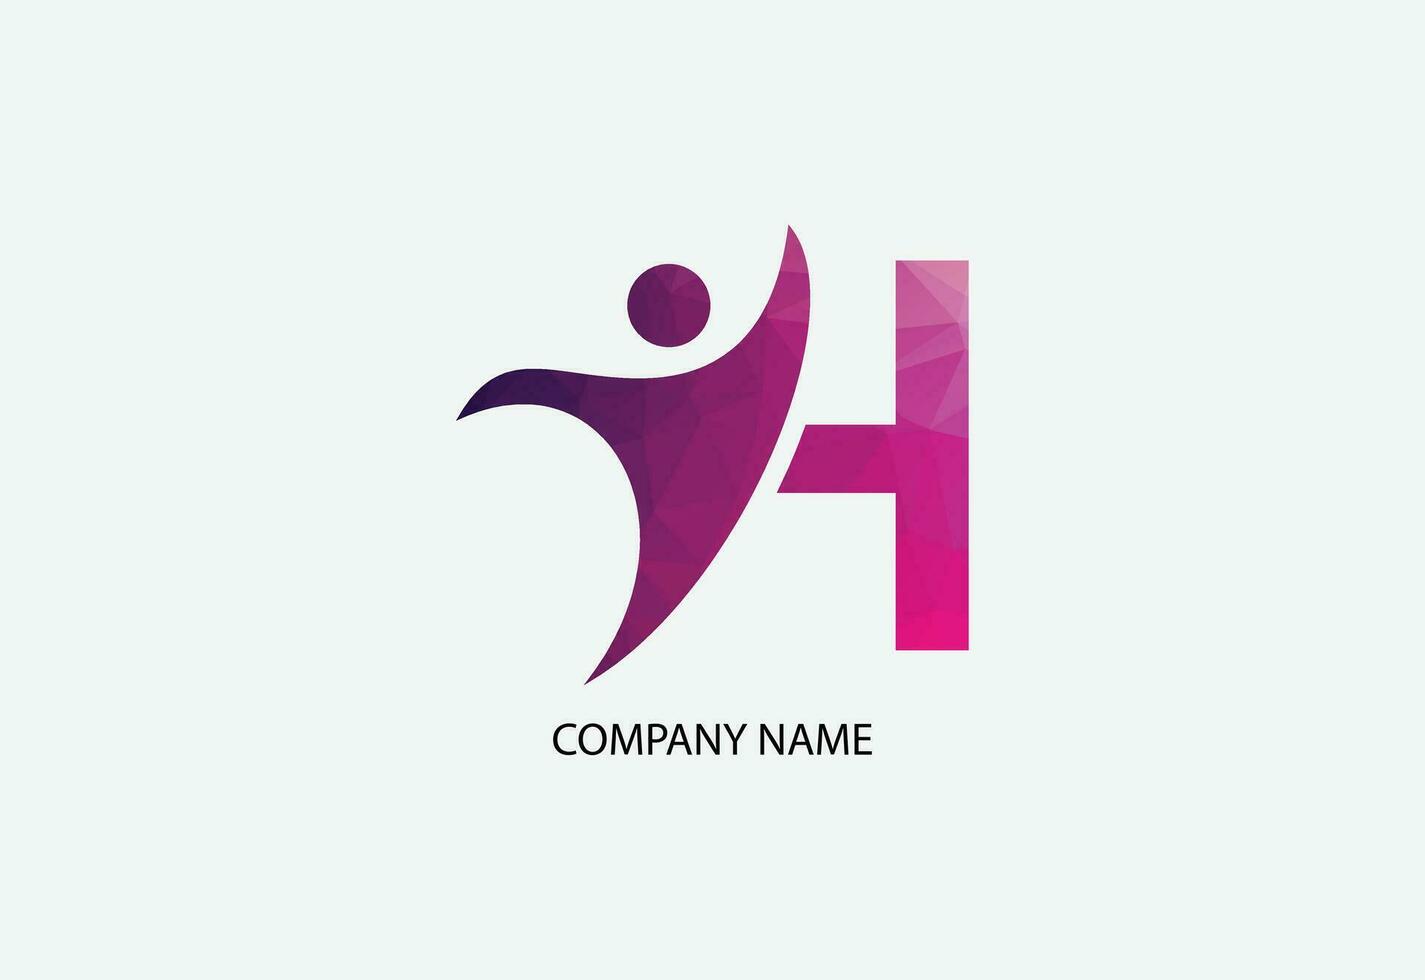 Low poly human health care logo illustrator template vector